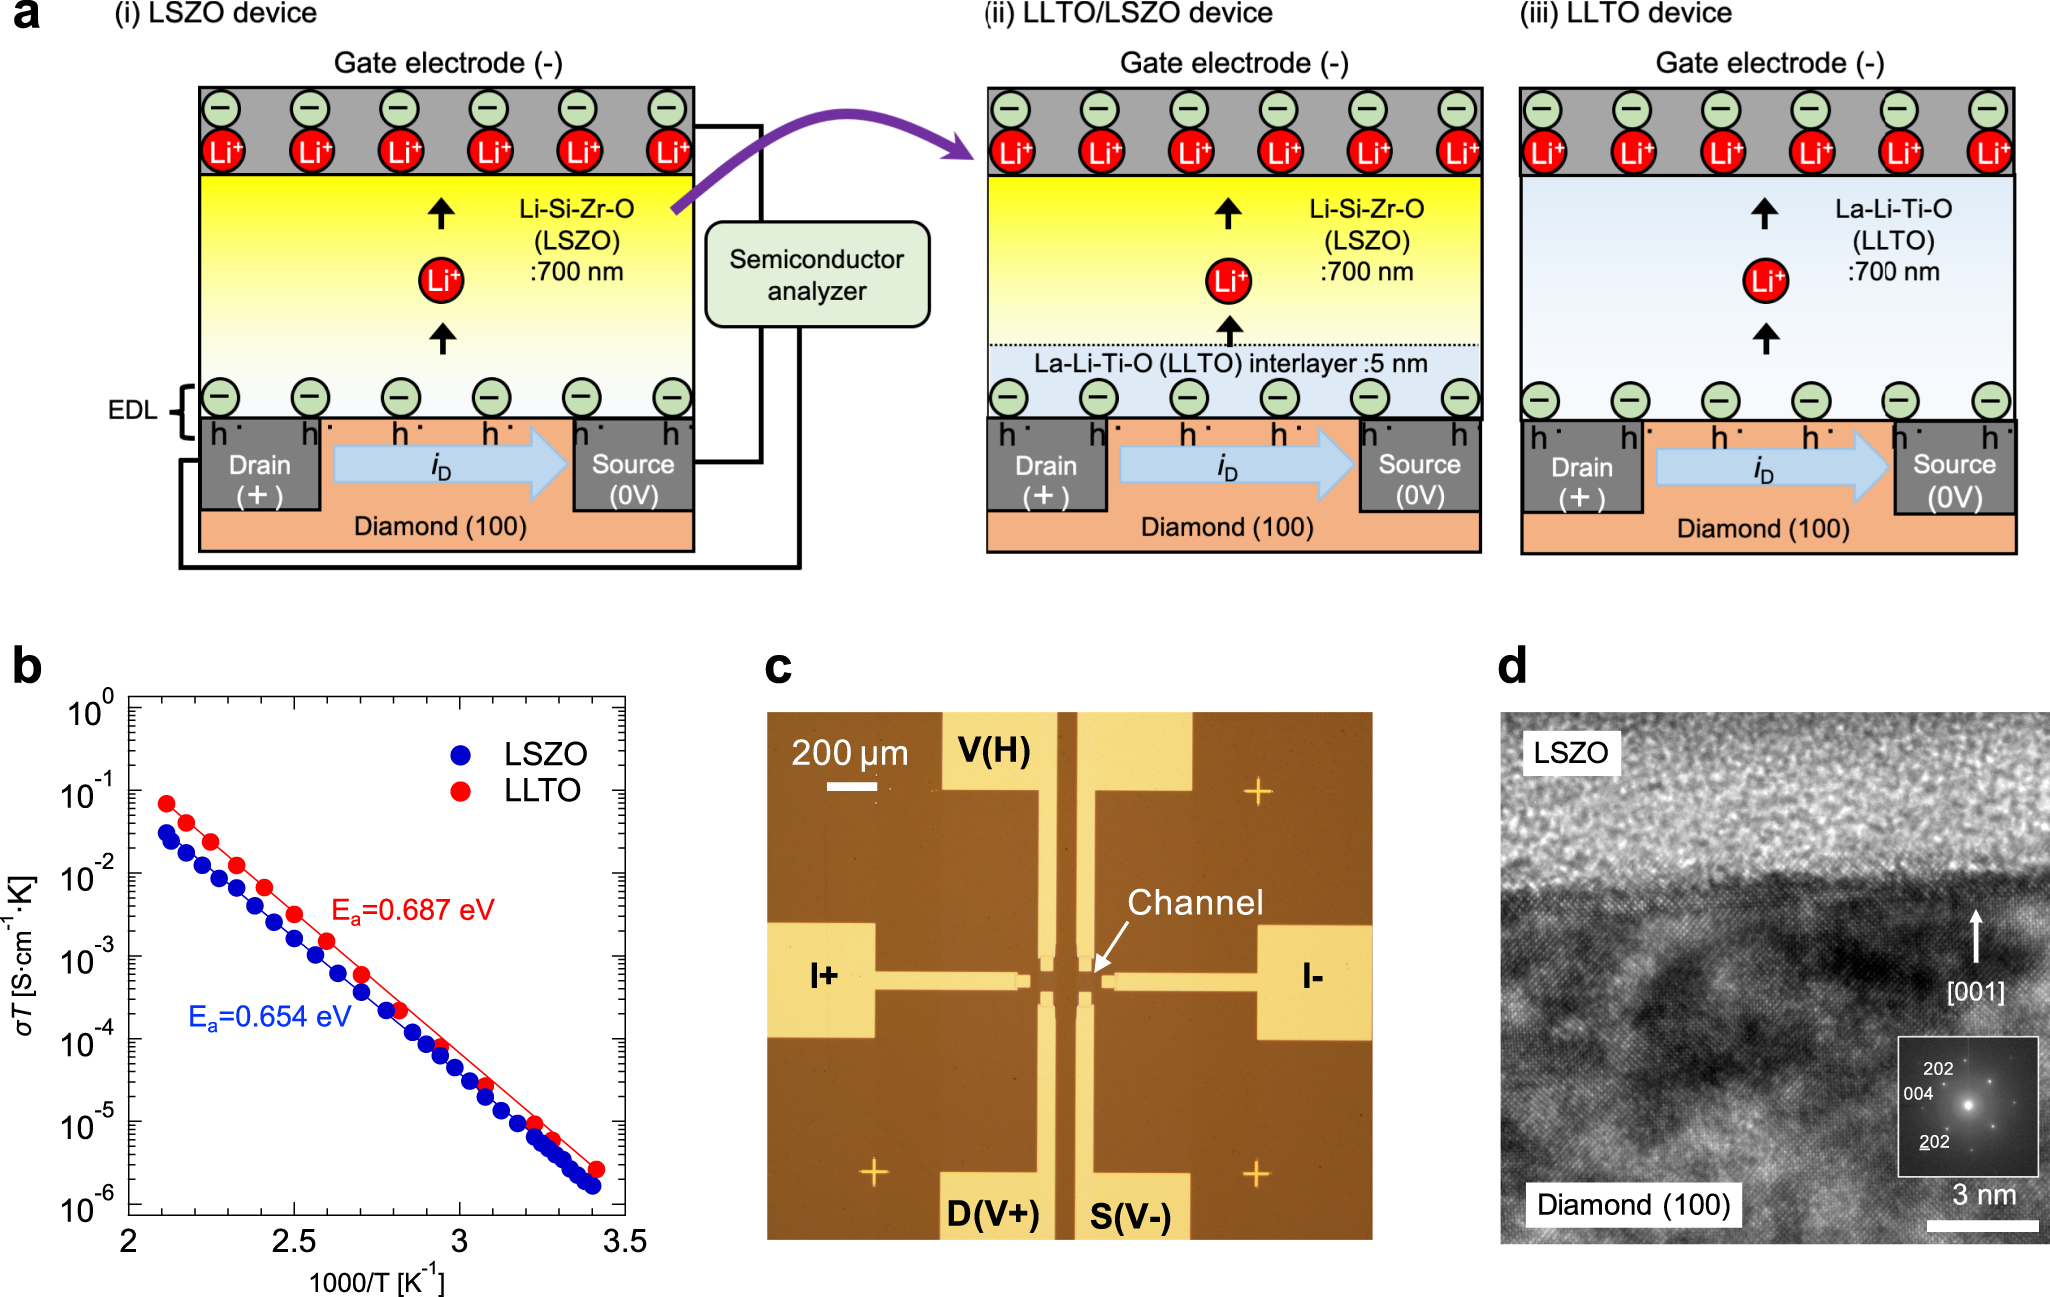 The electric double layer effect and its strong suppression at Li+ solid  electrolyte/hydrogenated diamond interfaces